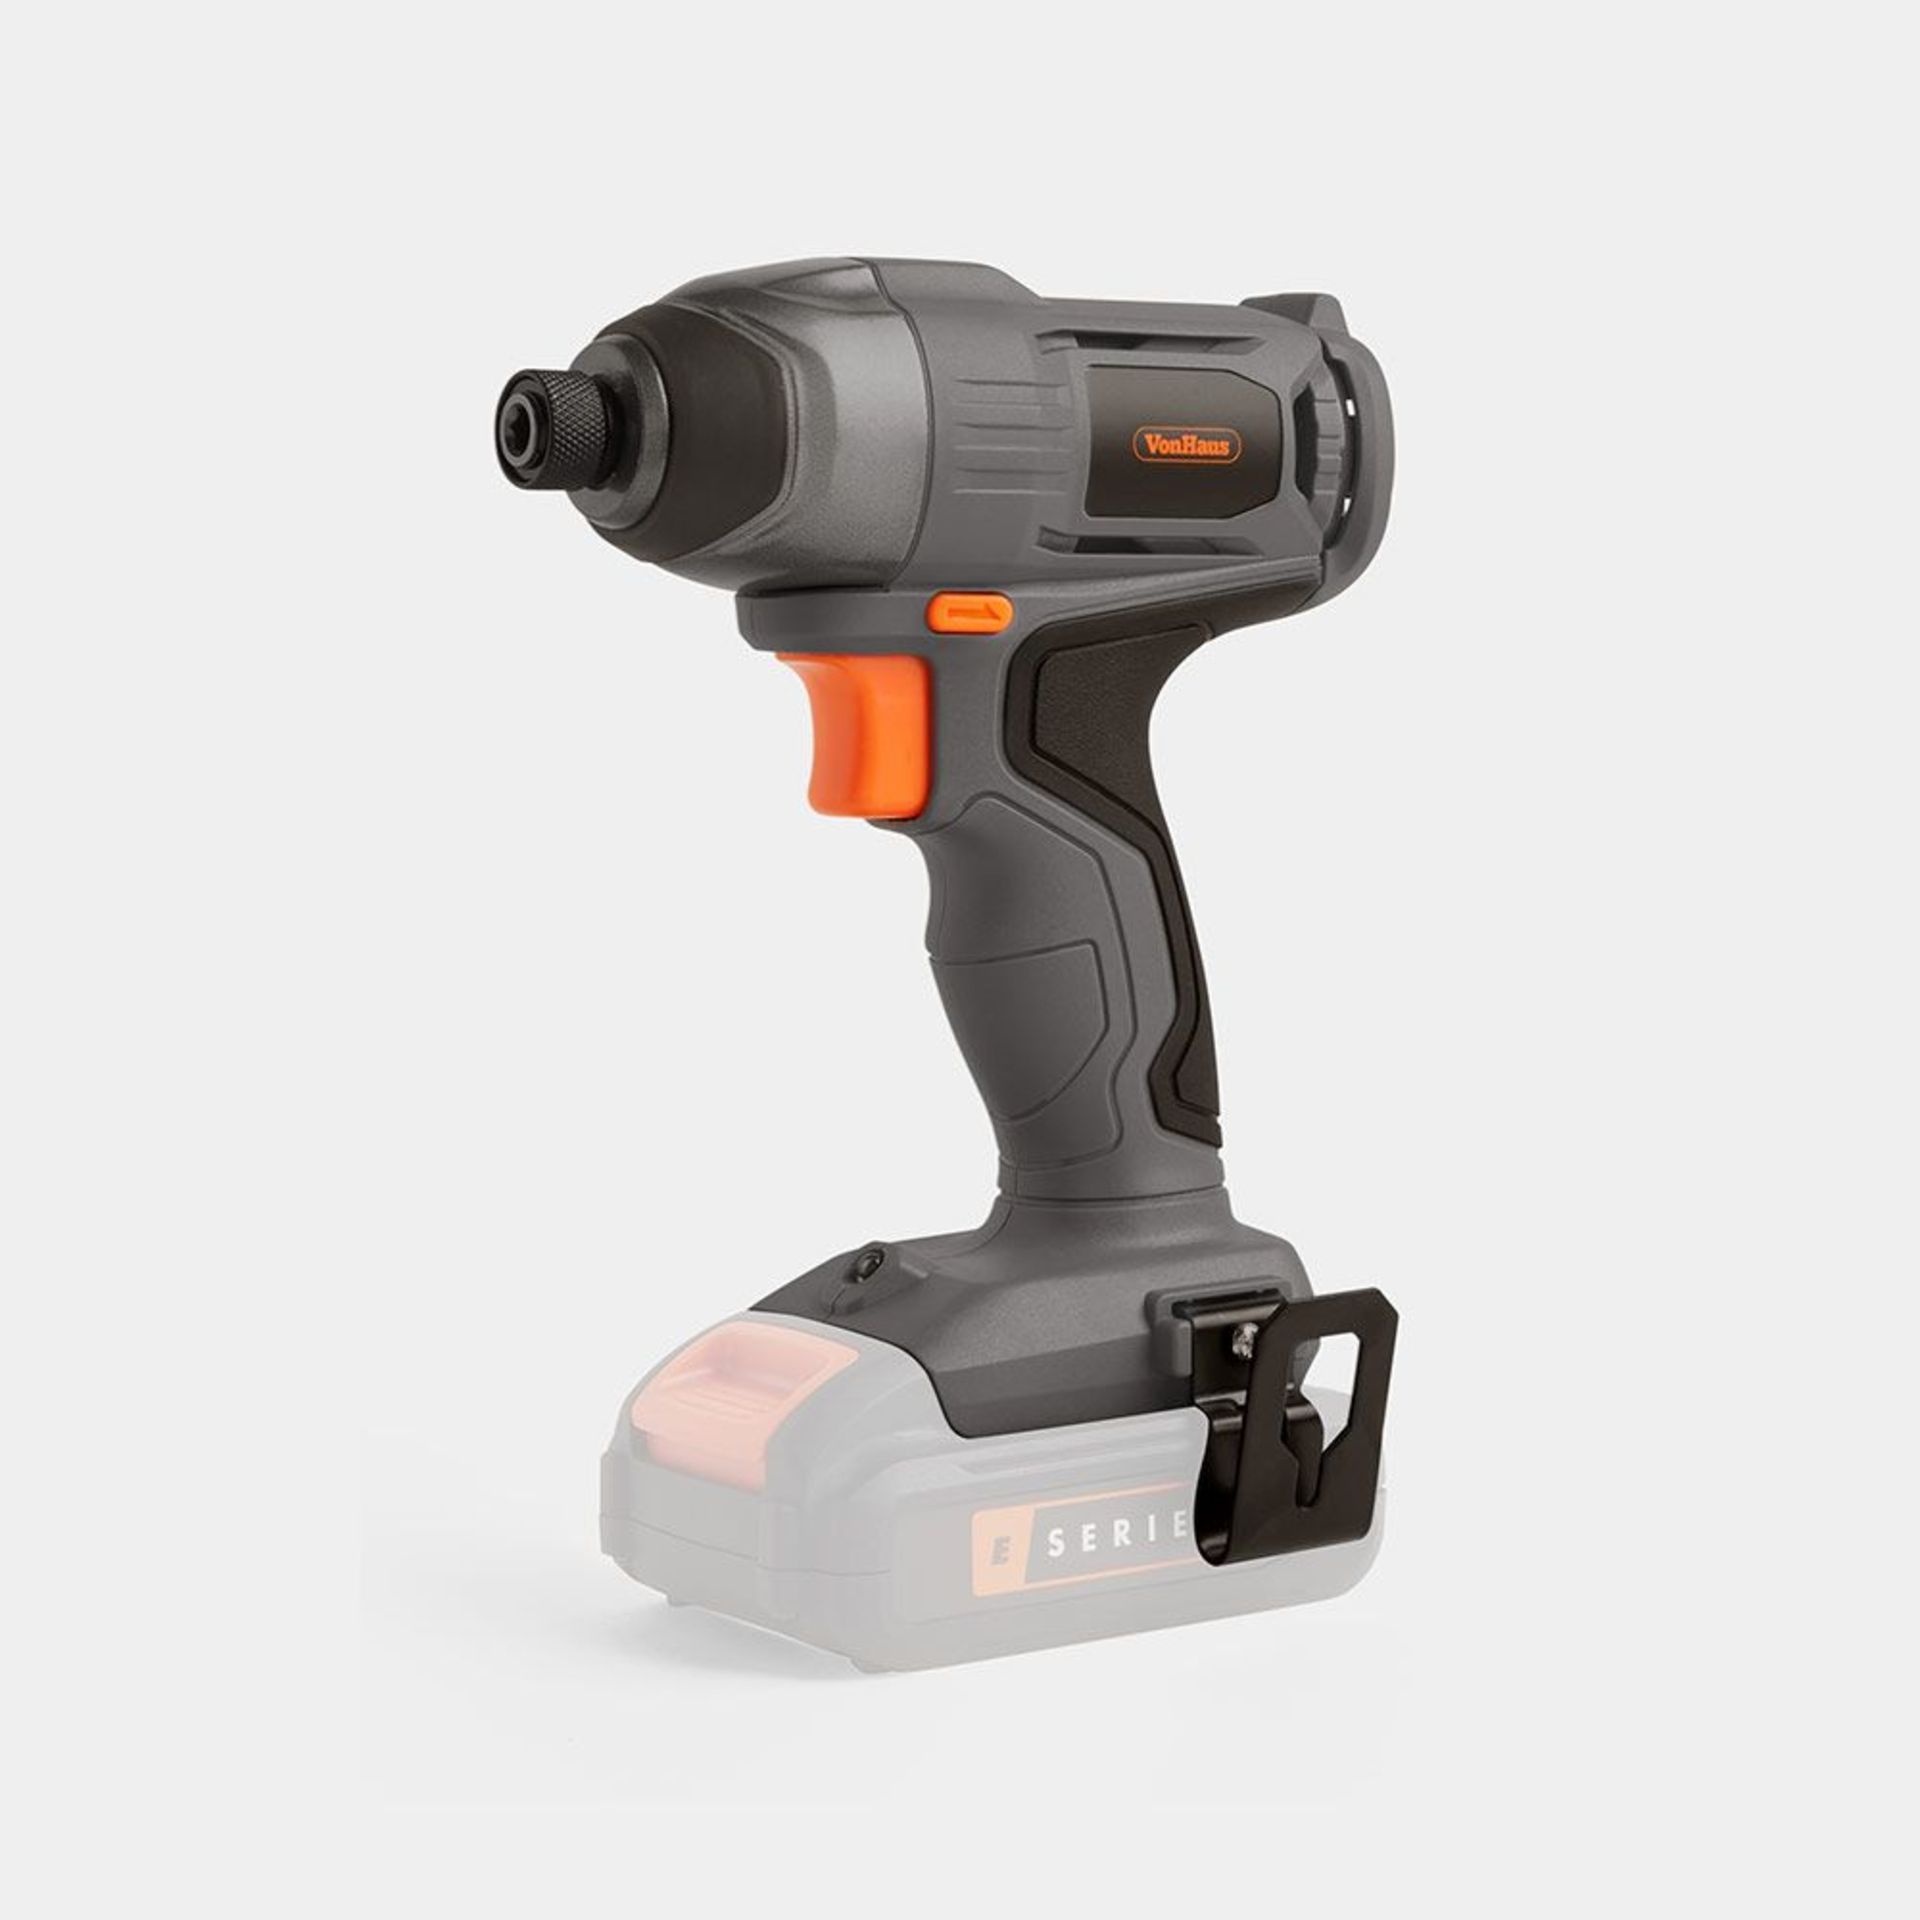 E-Series 18V Cordless Impact Drill Driver. - BI. Compact, cordless and well-built, this